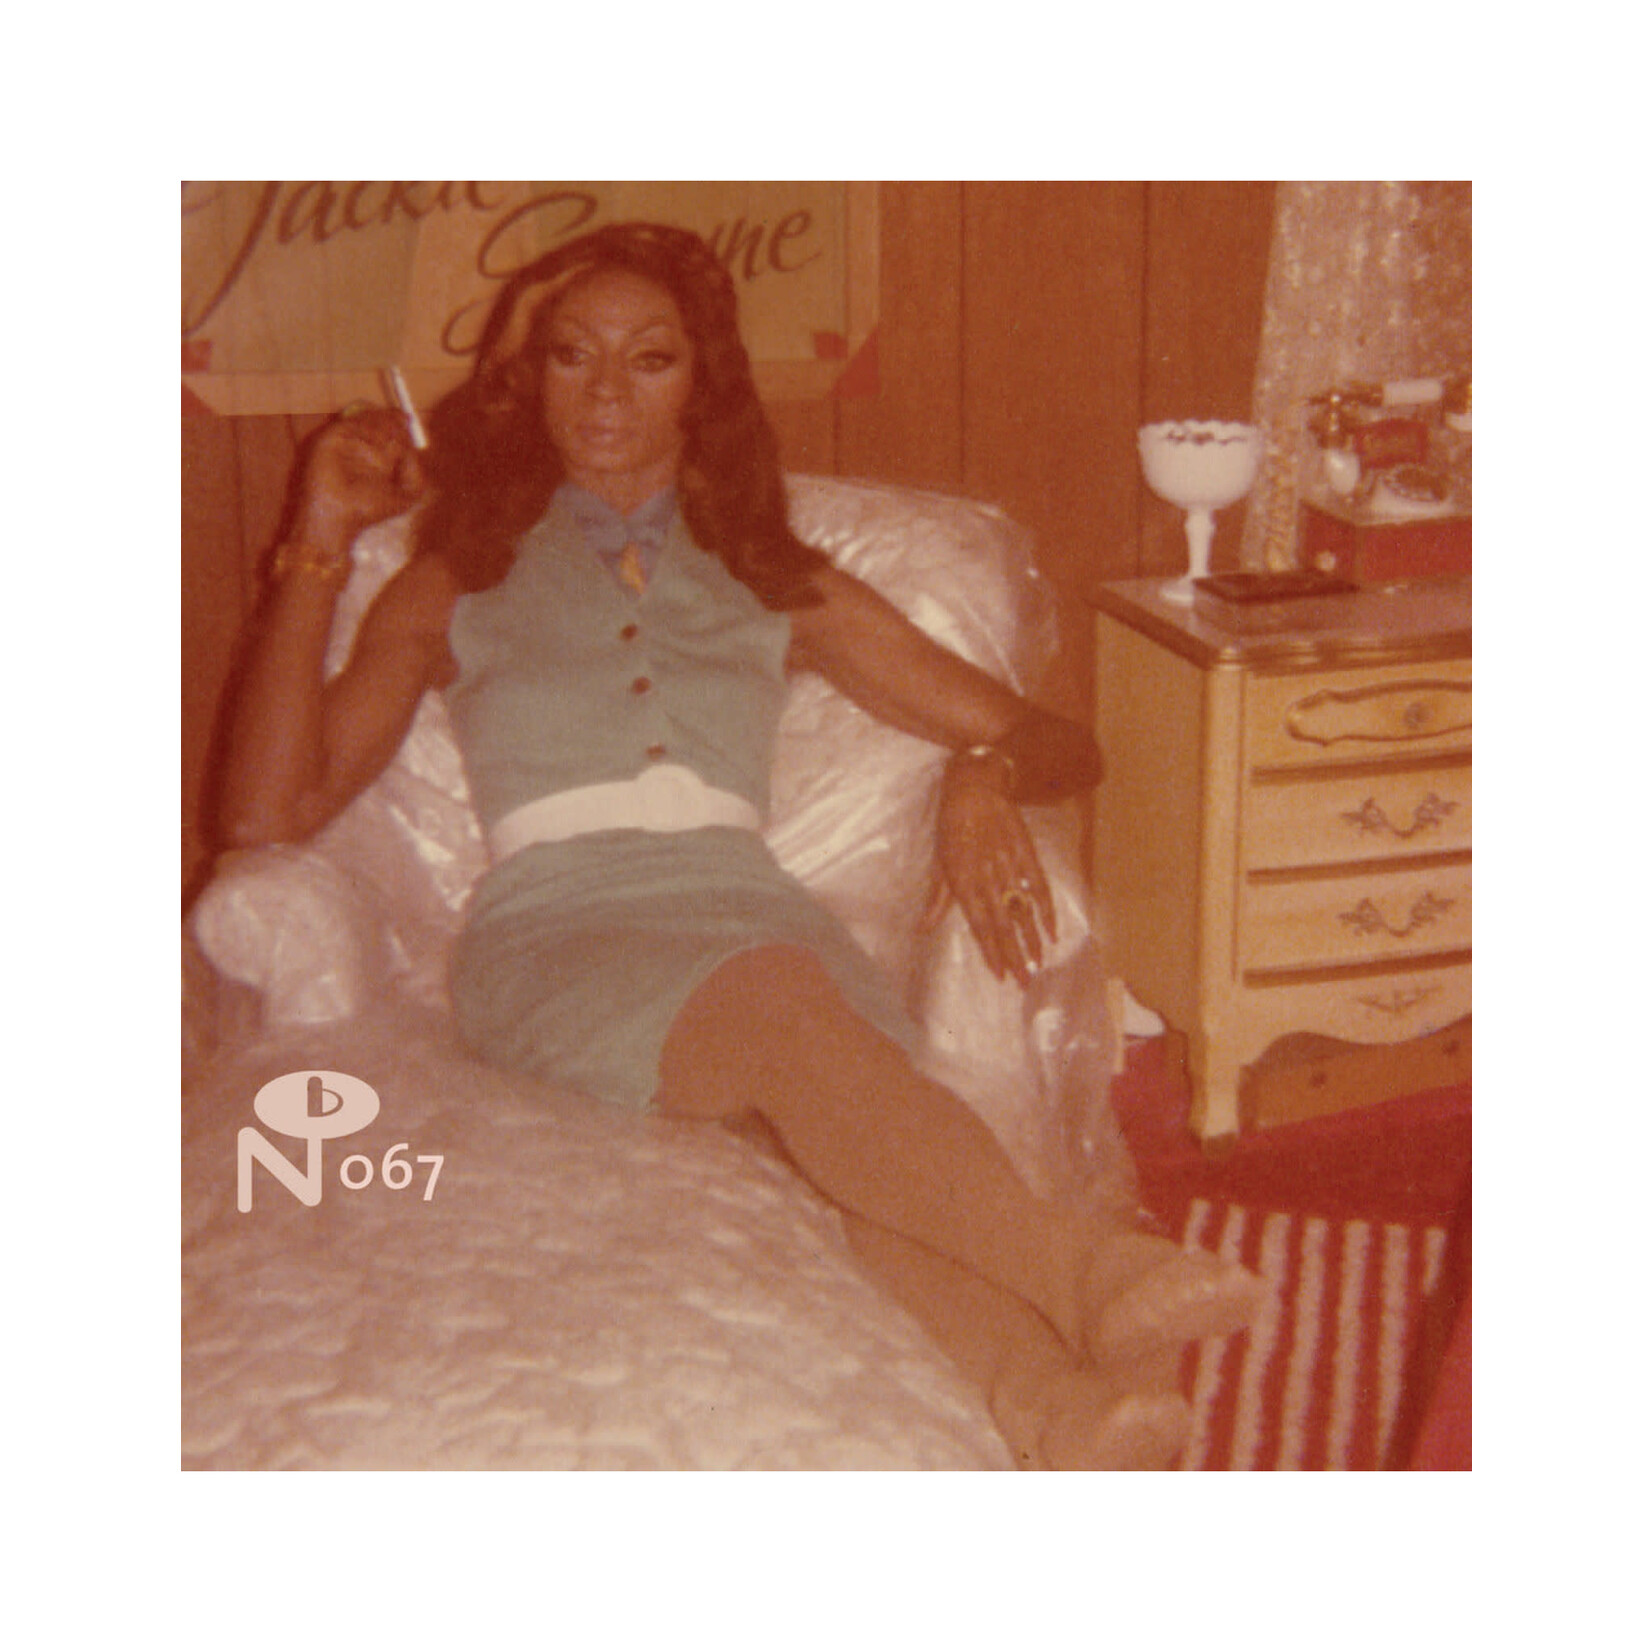 [New] Jackie Shane - Any Other Way (2LP, gold & black vinyl)